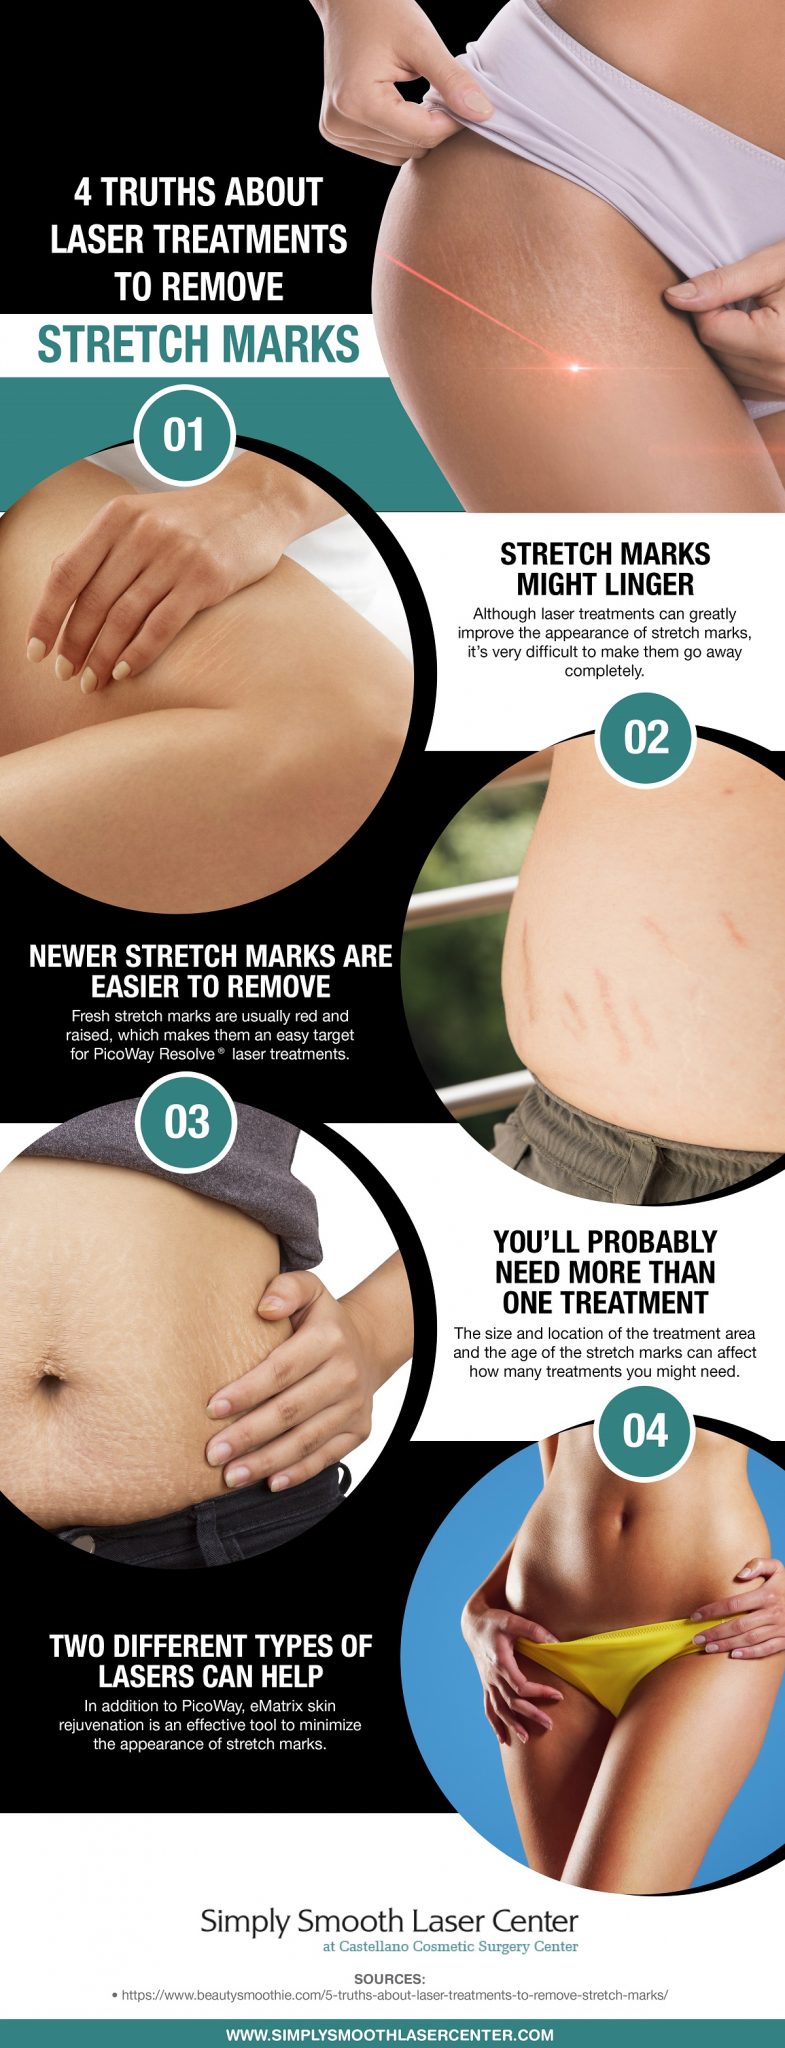 4 Truths About Laser Treatments To Remove Stretch Marks [Infographic]